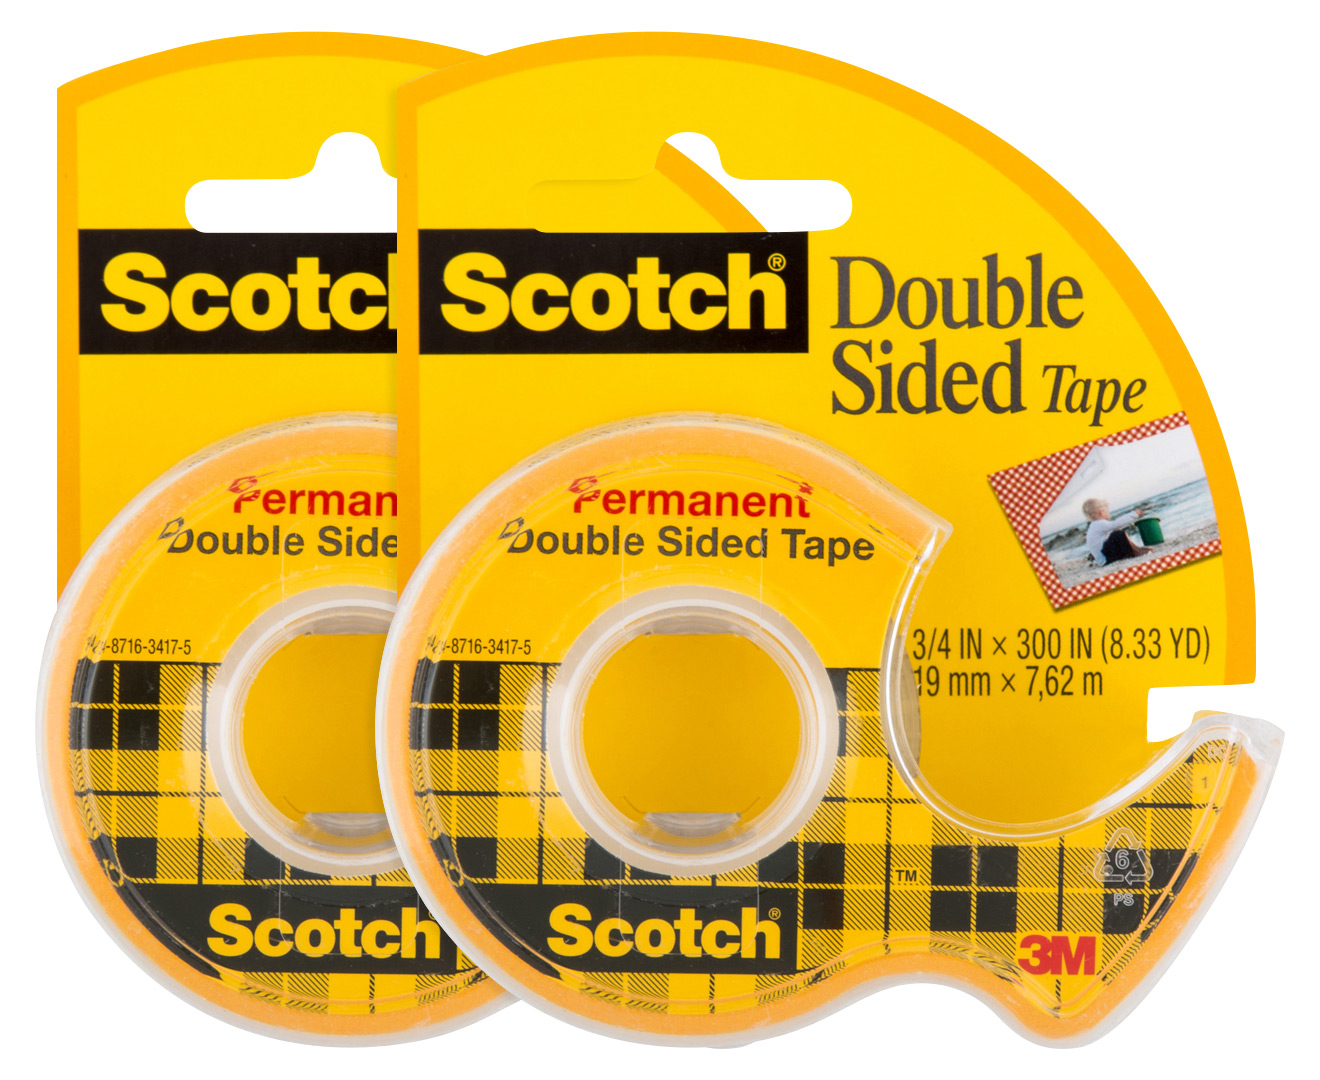 2 x Scotch Permanent Double-Sided Tape Dispenser